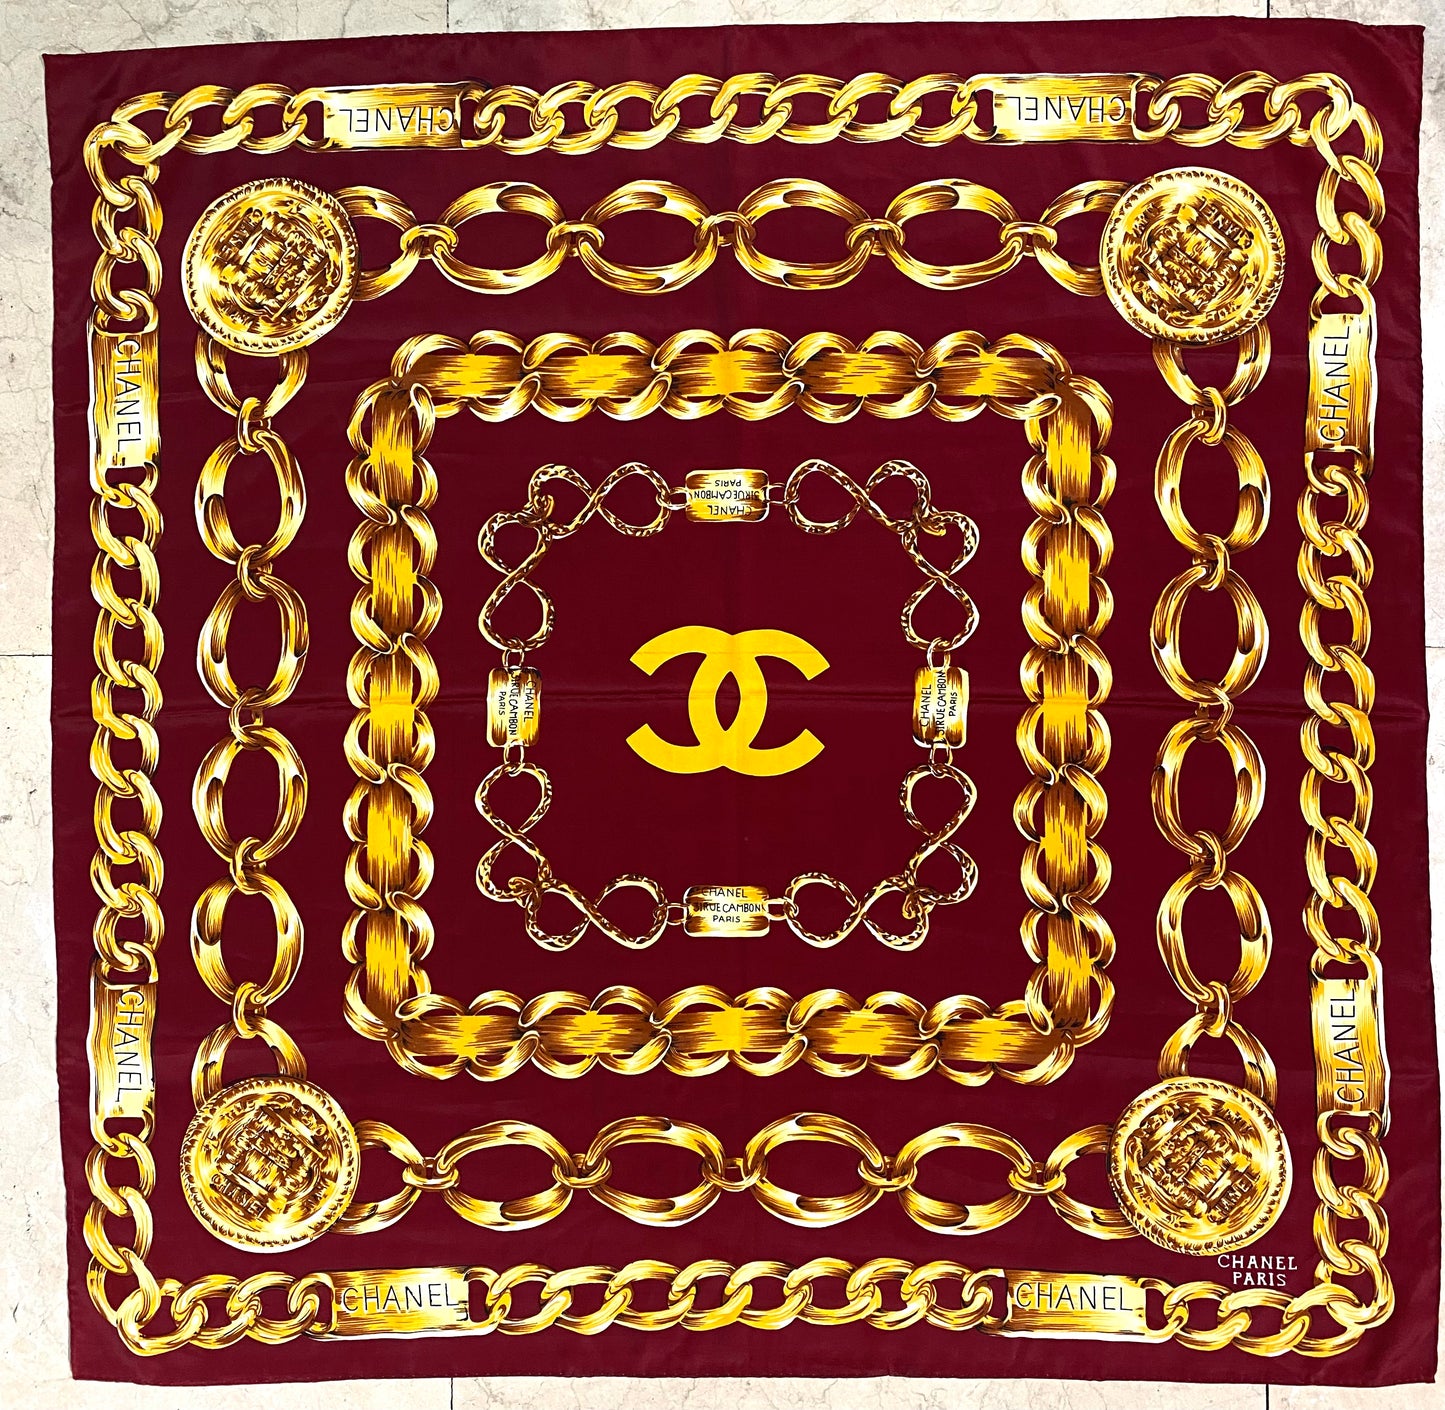 Chanel Paris iconic golden chains silk scarf, great condition